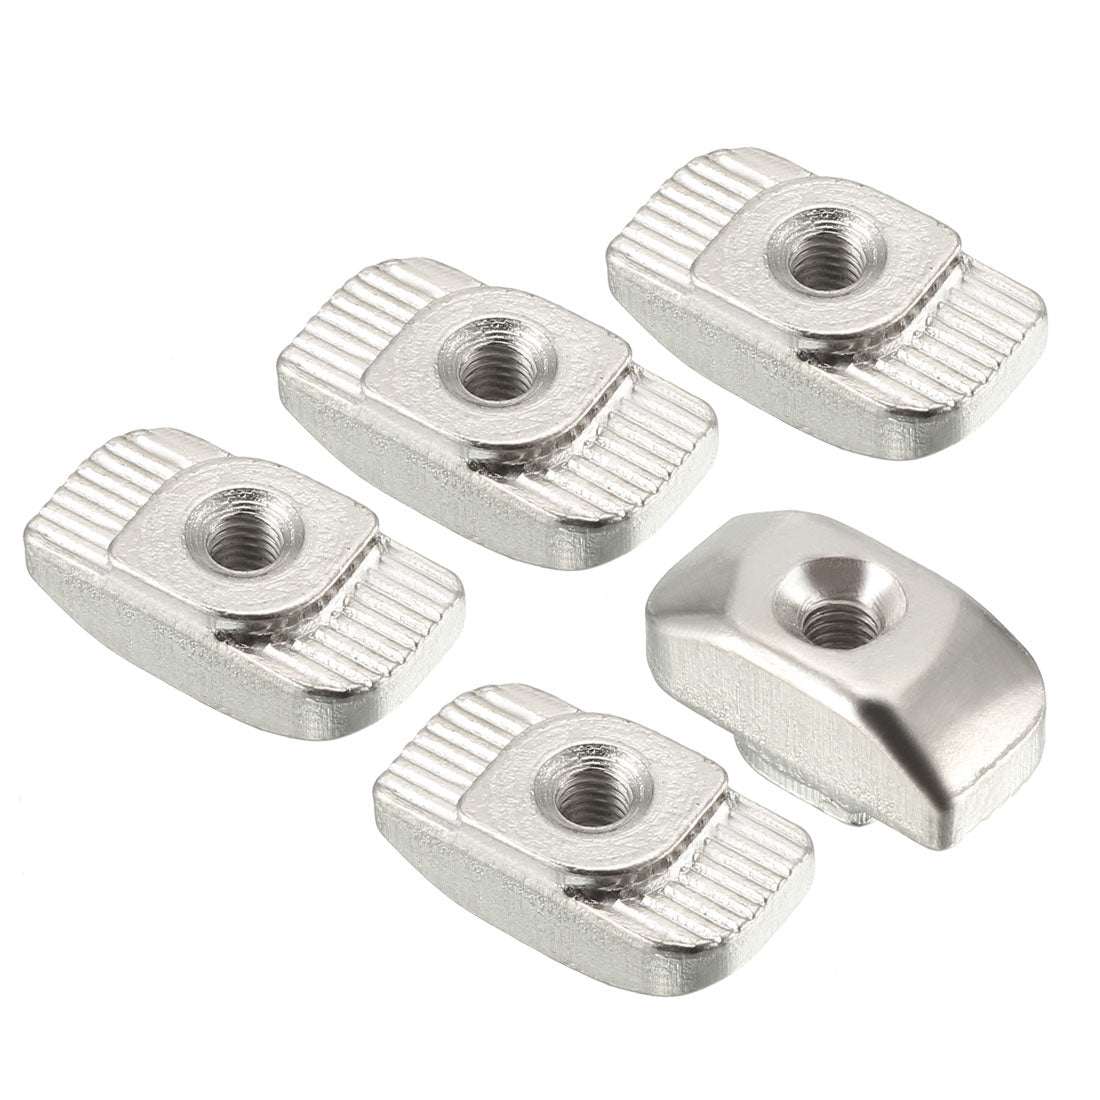 uxcell Uxcell Sliding T Slot Nuts, M3 Thread for 3030 Series Aluminum Extrusion Profile 10pcs